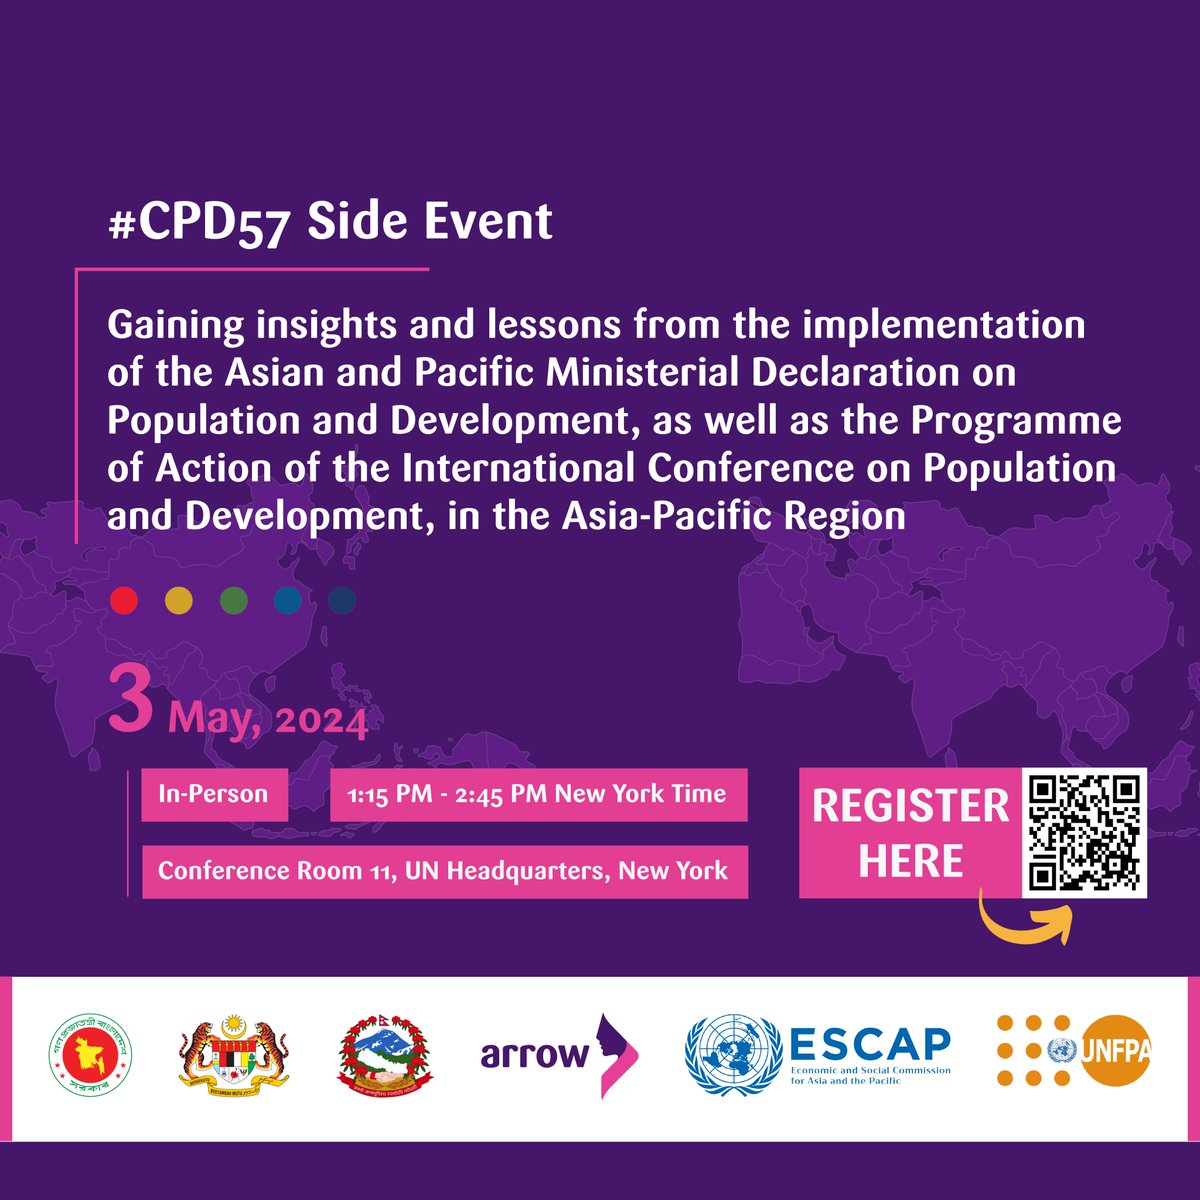 📢Join our side event at the CPD57, co-organised with the Permanent Mission of the People’s Republic of Bangladesh, @NepalUNNY, @MYNewYorkUN1, @UNESCAP, and @UNFPA.

Register➡️ forms.gle/PJQugkcV5tVtF1…
Date: May 3, 2024
Time: 1:15 PM to 2:45 PM ET
Venue: CR 11, UNHQ, NY

#ICPD30